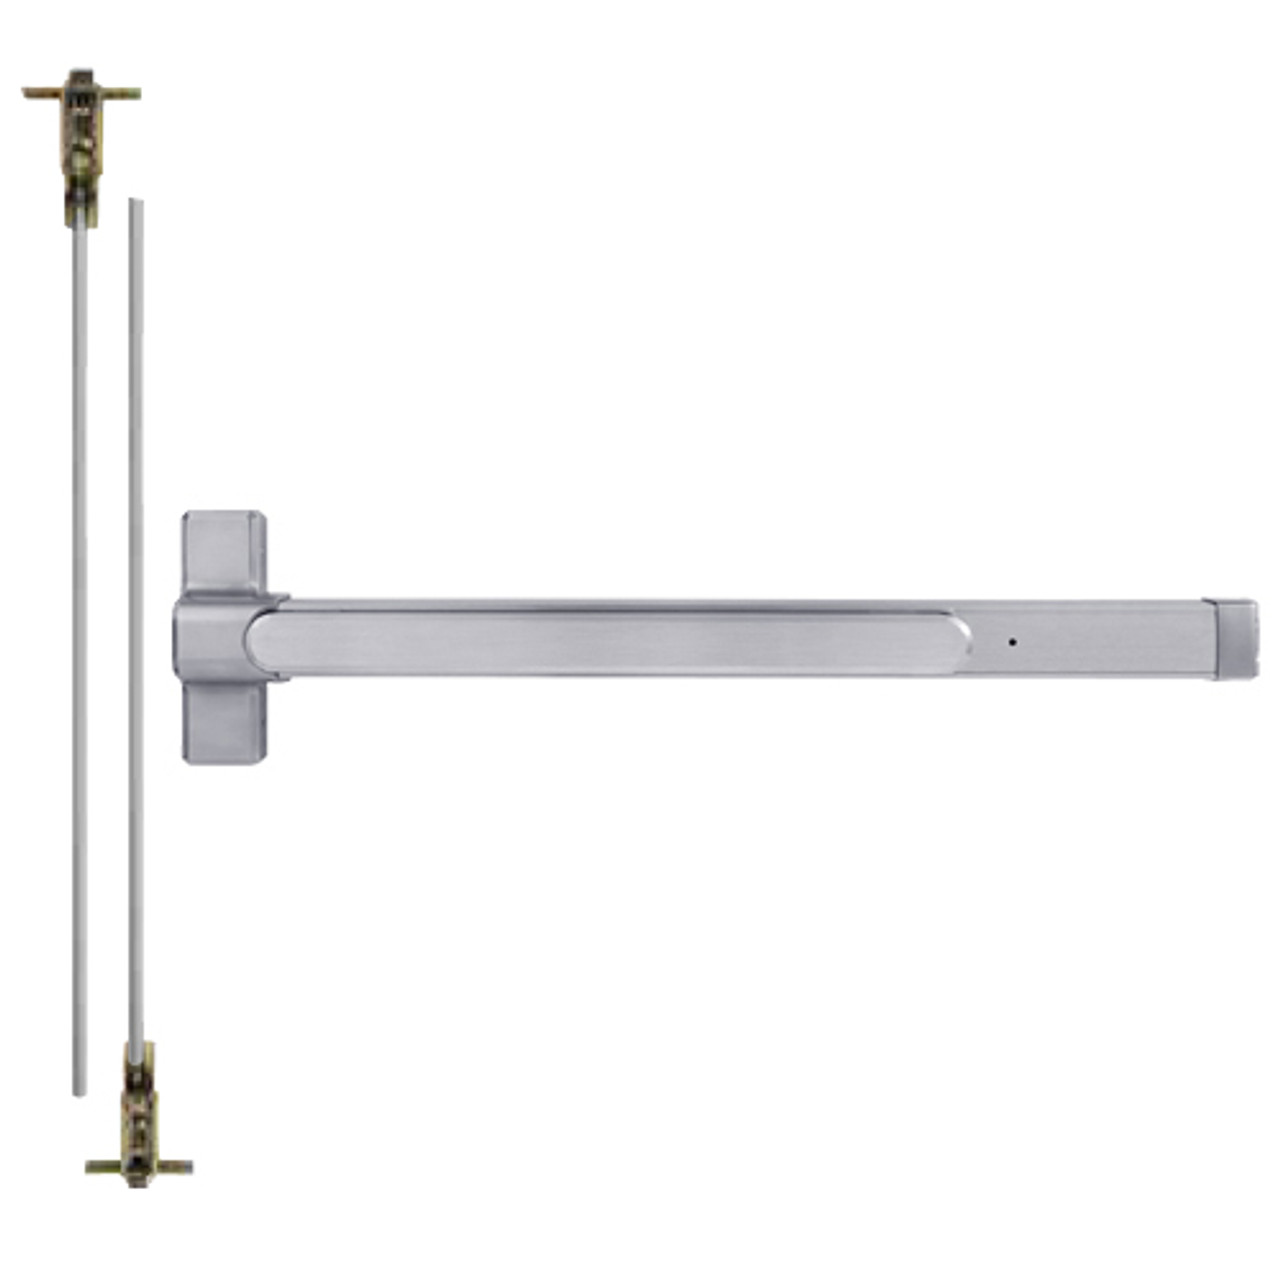 QED126LR-48-7-626 Stanley QED100 Series Heavy Duty Concealed Vertical Rod Fire Rated Exit Device in Satin Chrome Finish